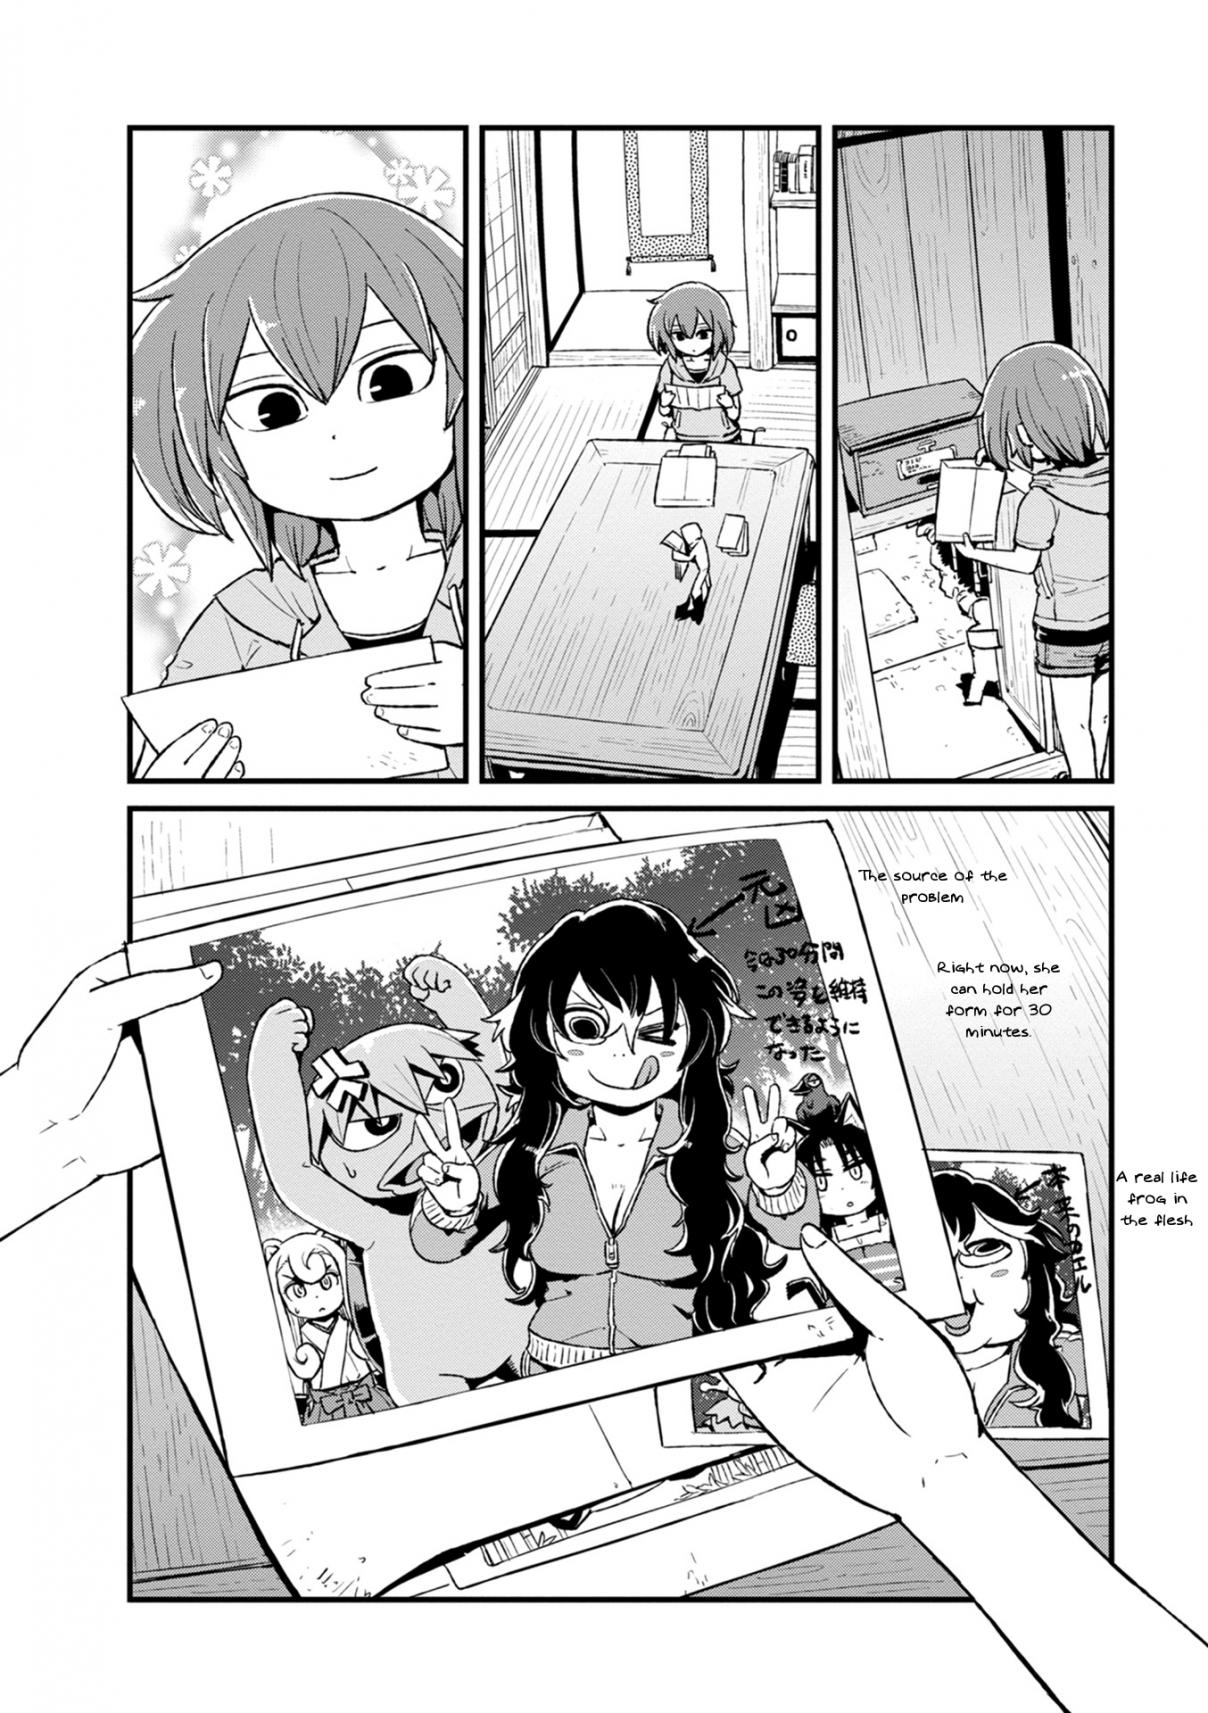 Neko Musume Michikusa Nikki Vol. 15 Ch. 92 Passing the Time Reporting on the Frog Person's Progress